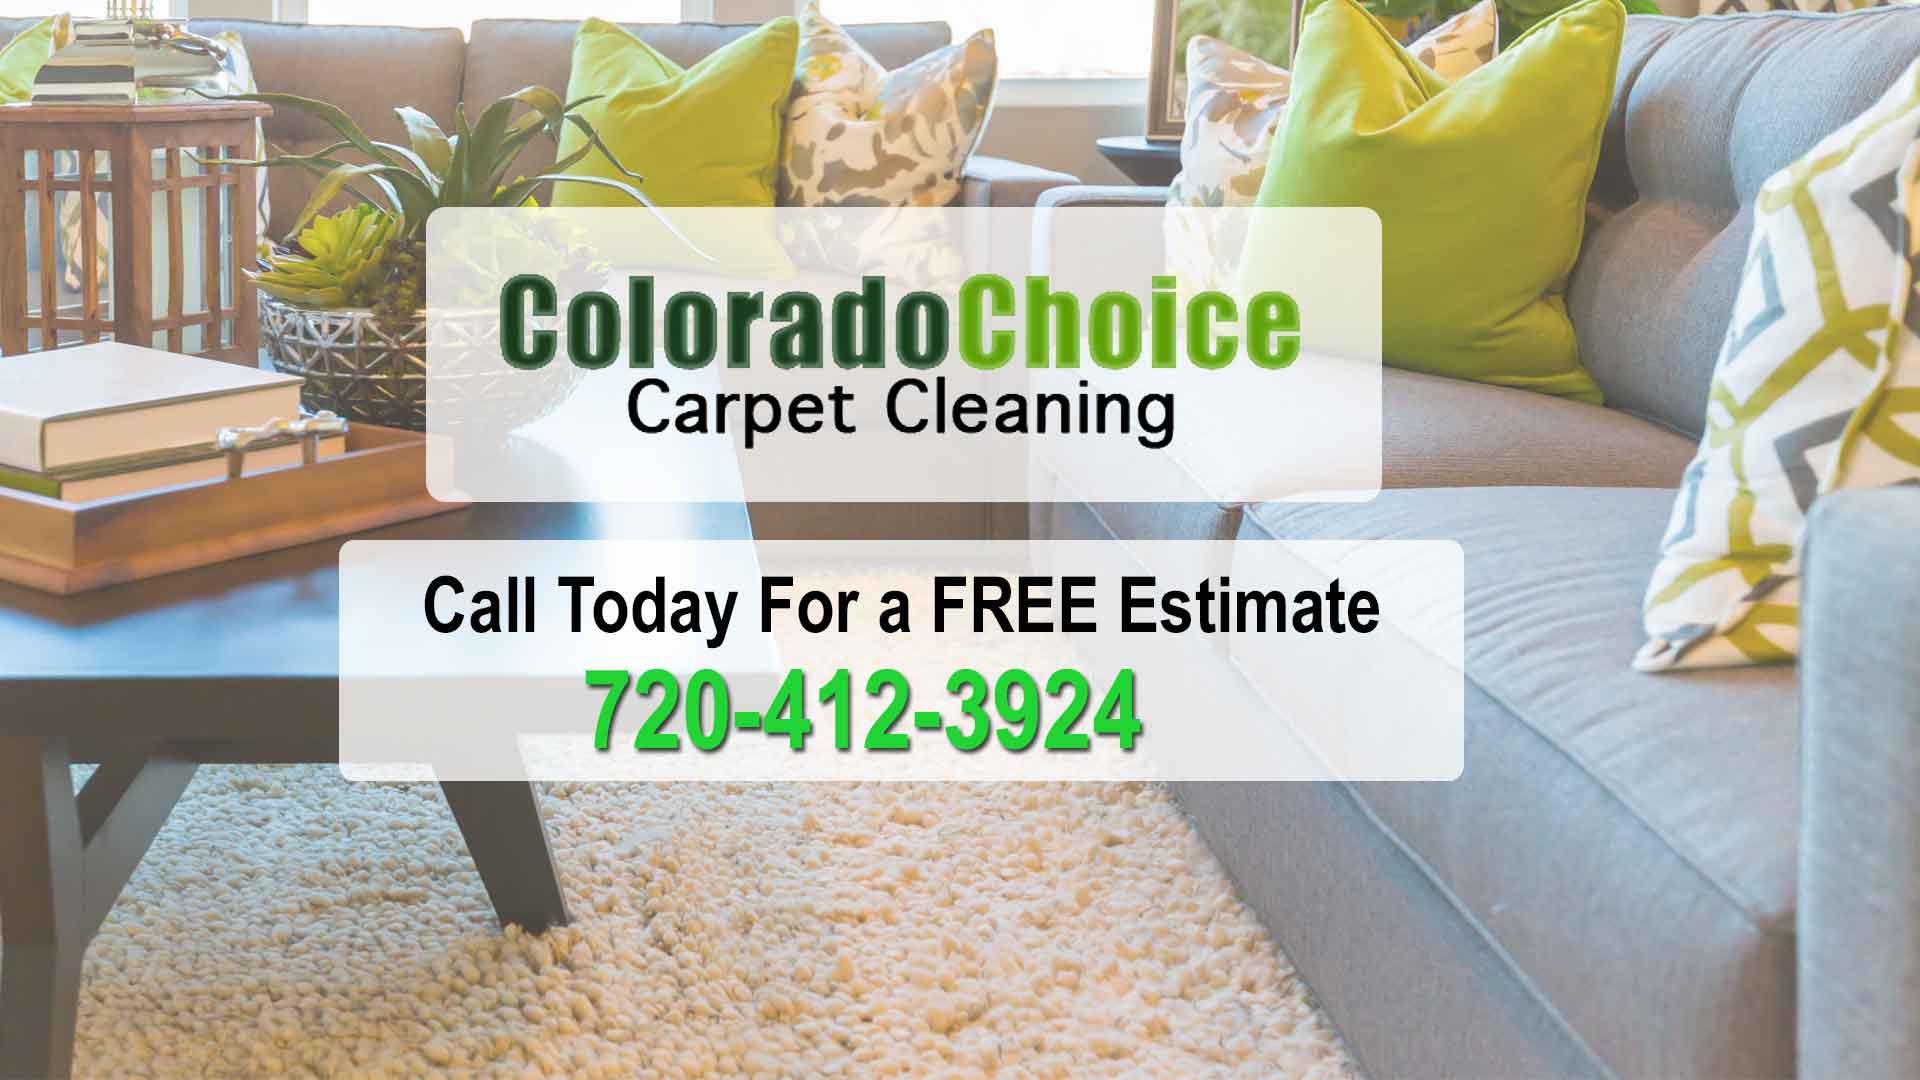 Colorado Choice Carpet Cleaning